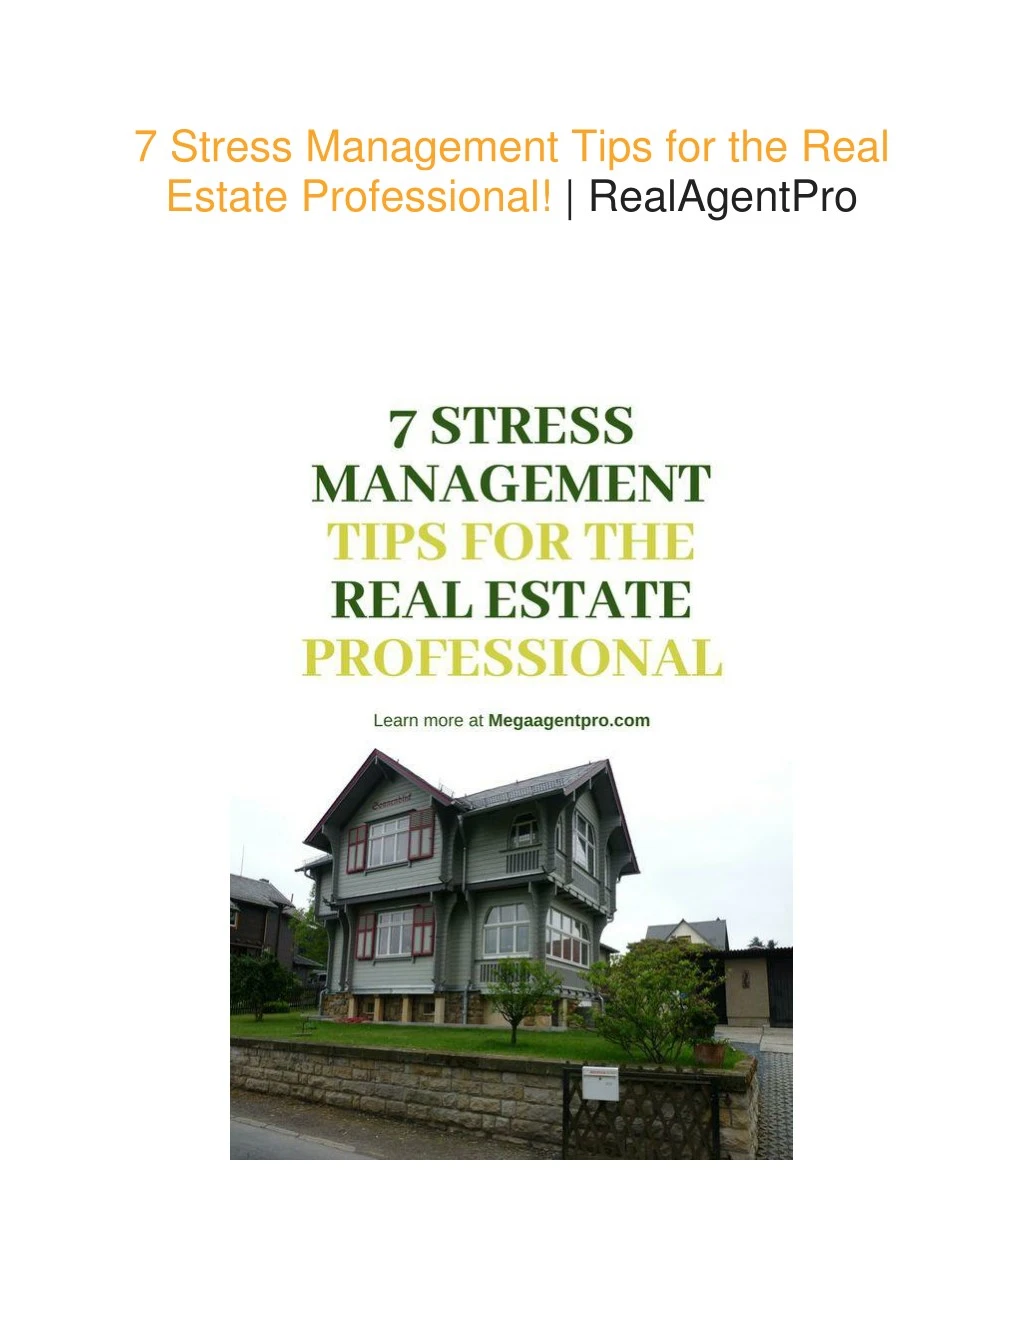 7 stress management tips for the real estate